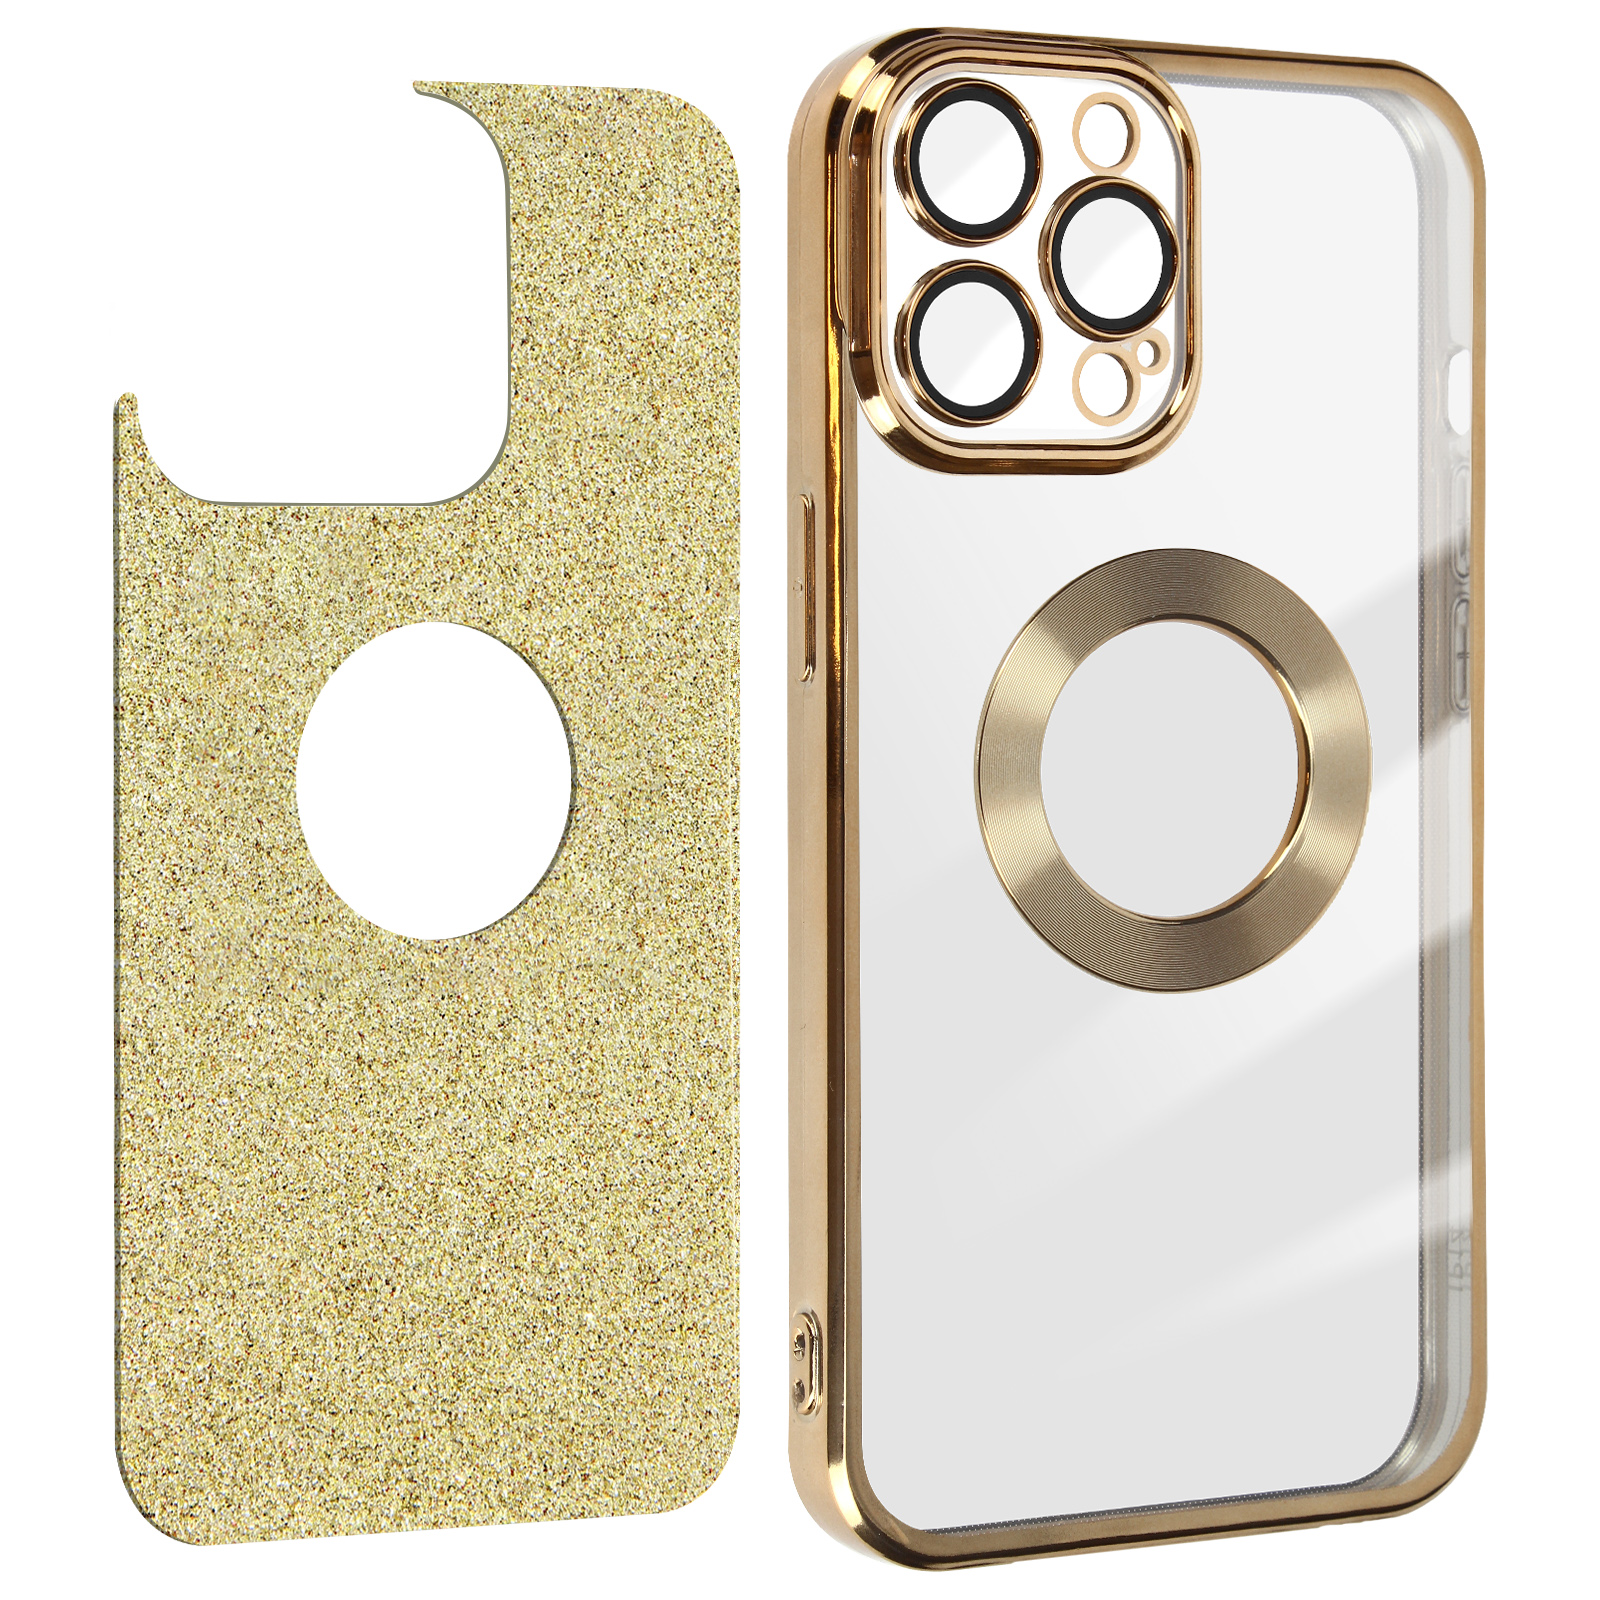 AVIZAR Pro Spark Backcover, Protecam iPhone 13 Series, Max, Apple, Gold